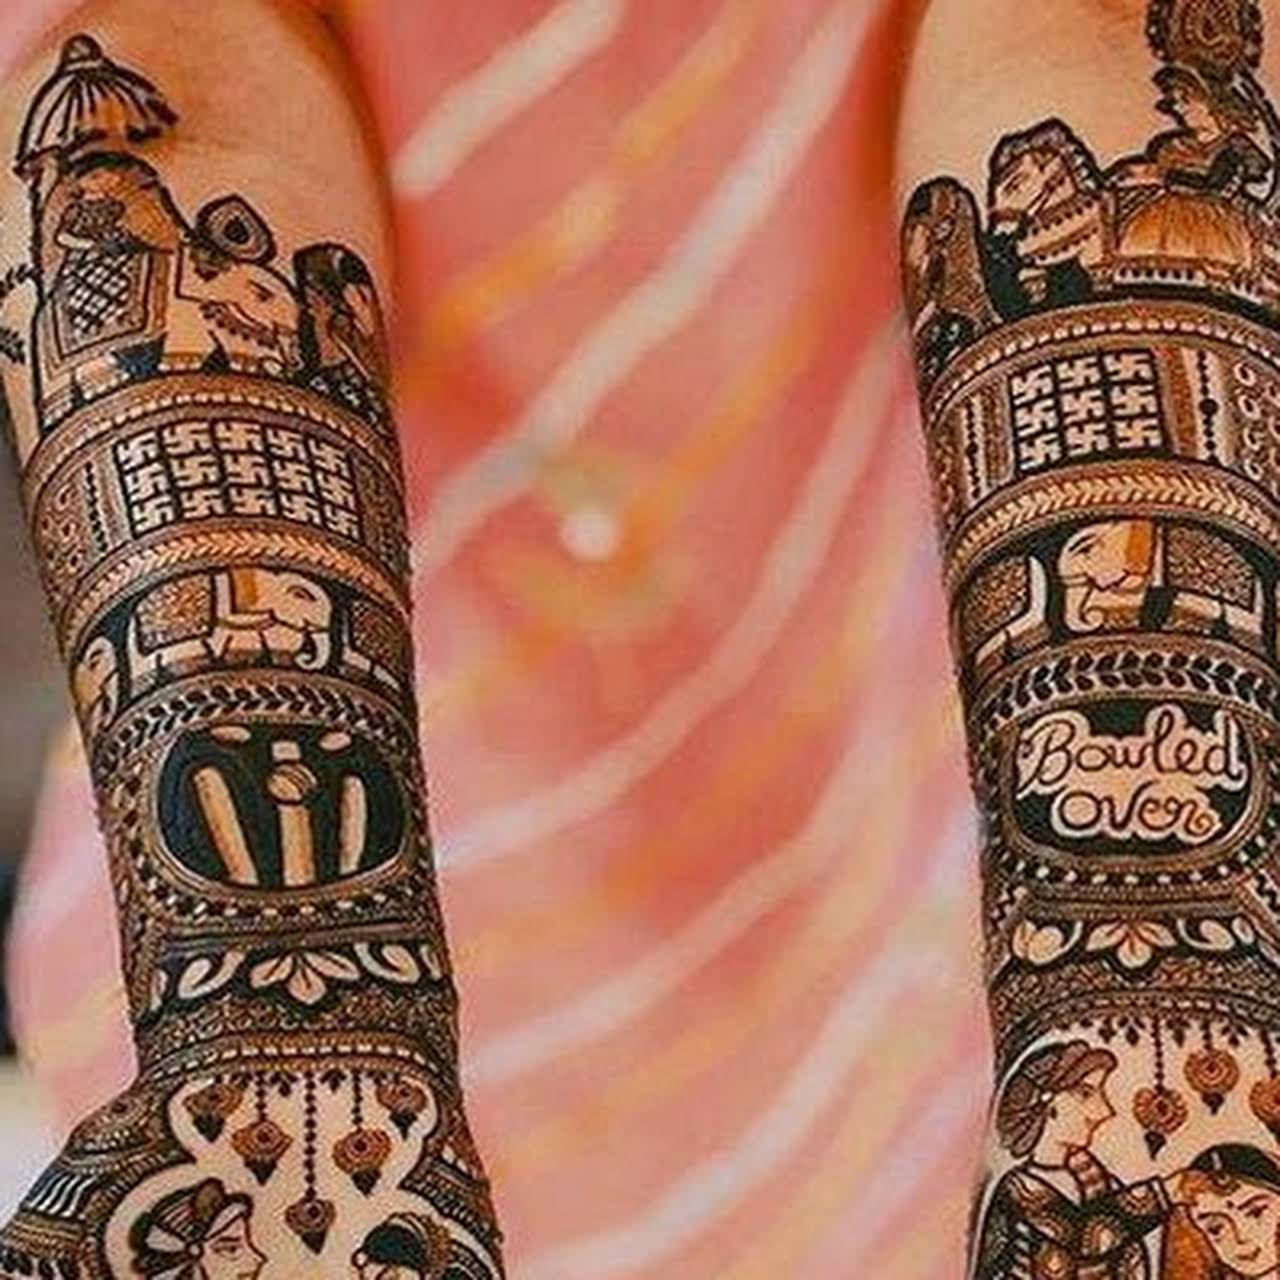 Which global celebrities have tattoos made in Sanskrit? - Quora